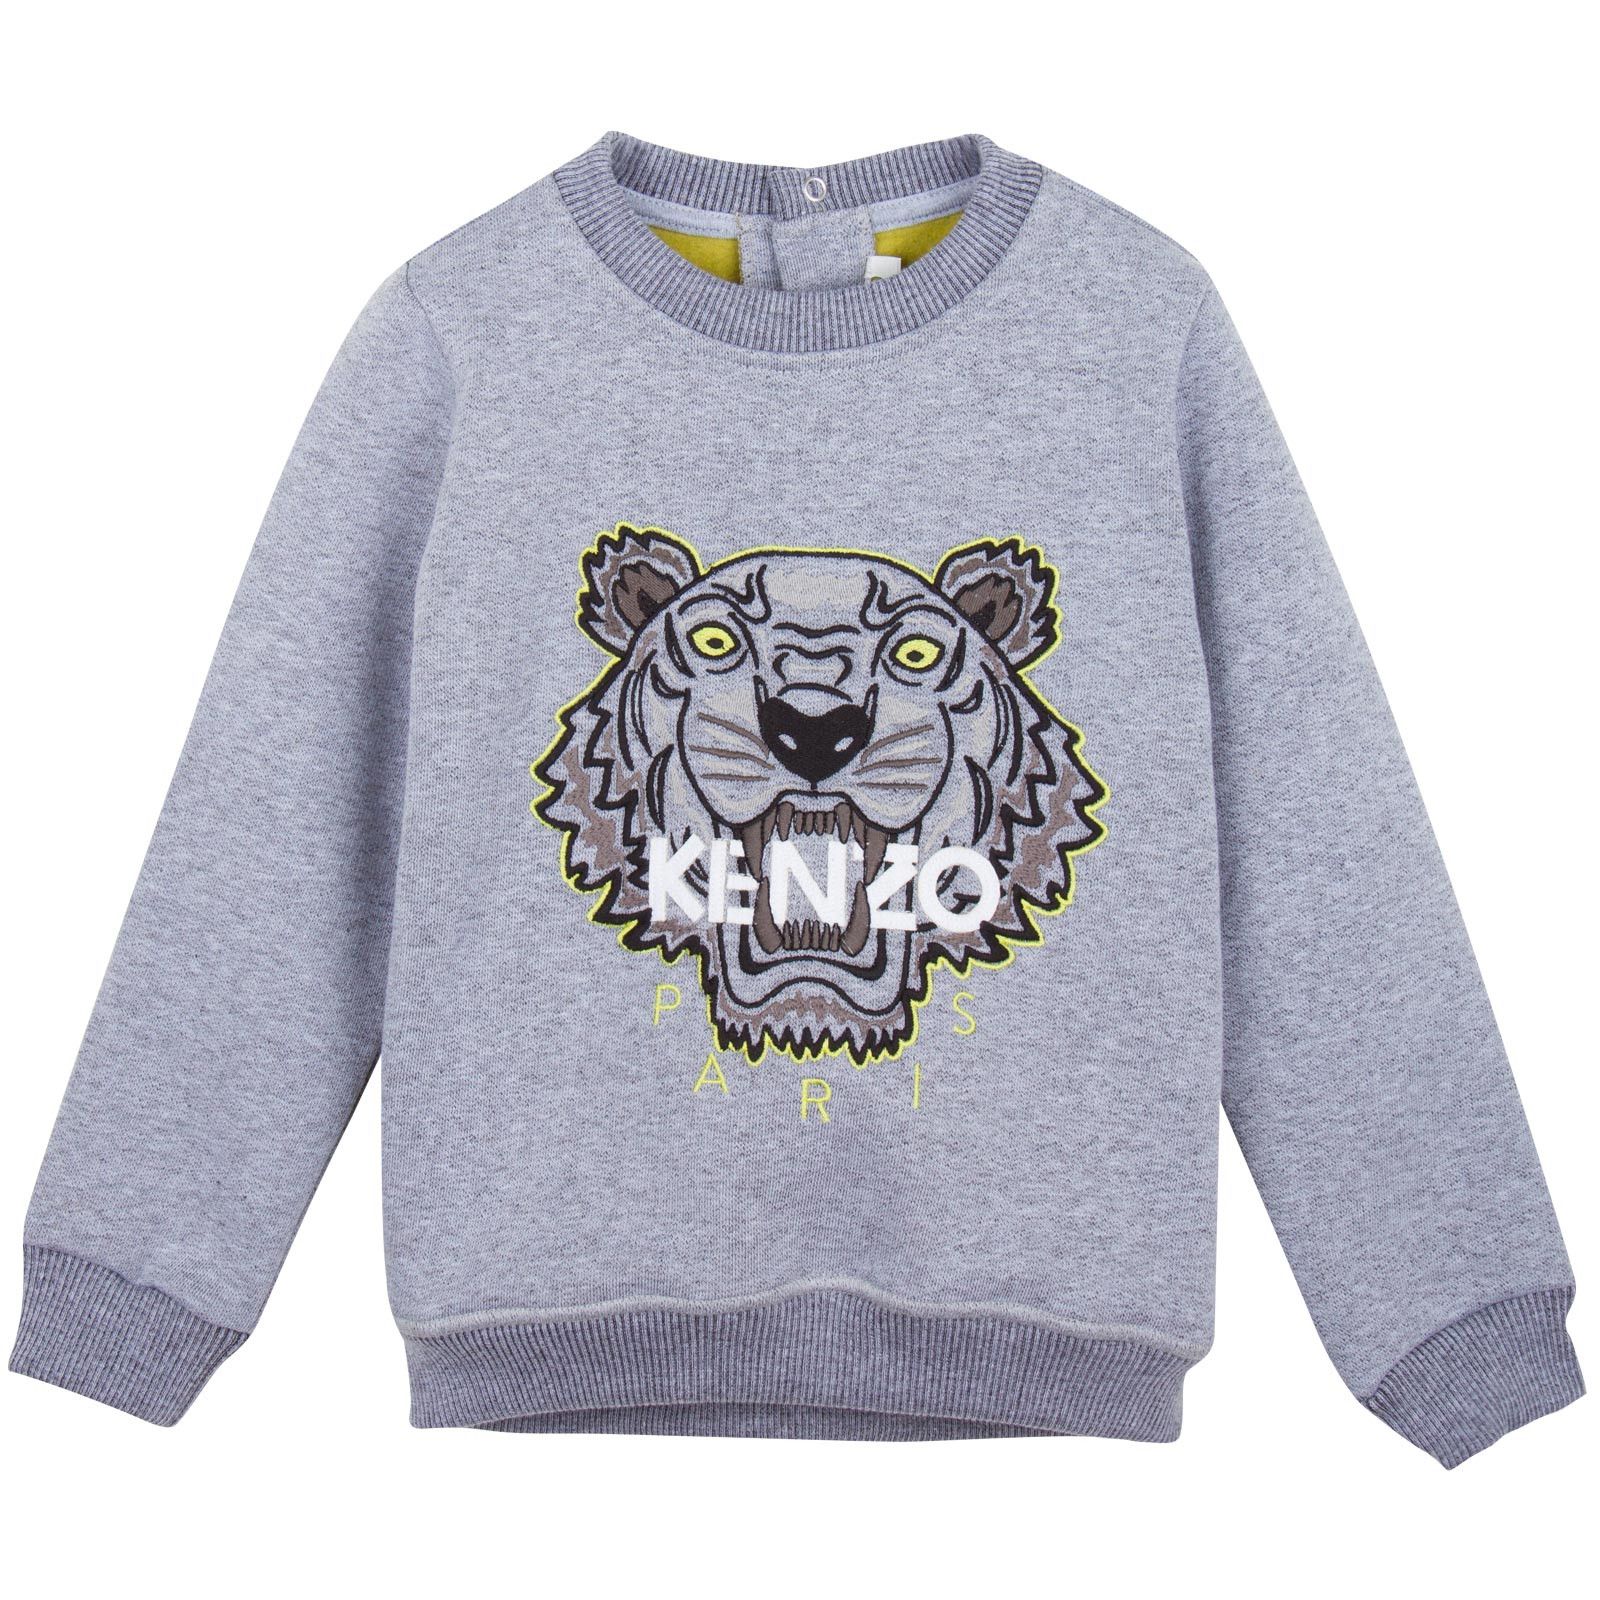 Baby Grey Tiger Embroidered Sweatshirt With Green Lining - CÉMAROSE | Children's Fashion Store - 1